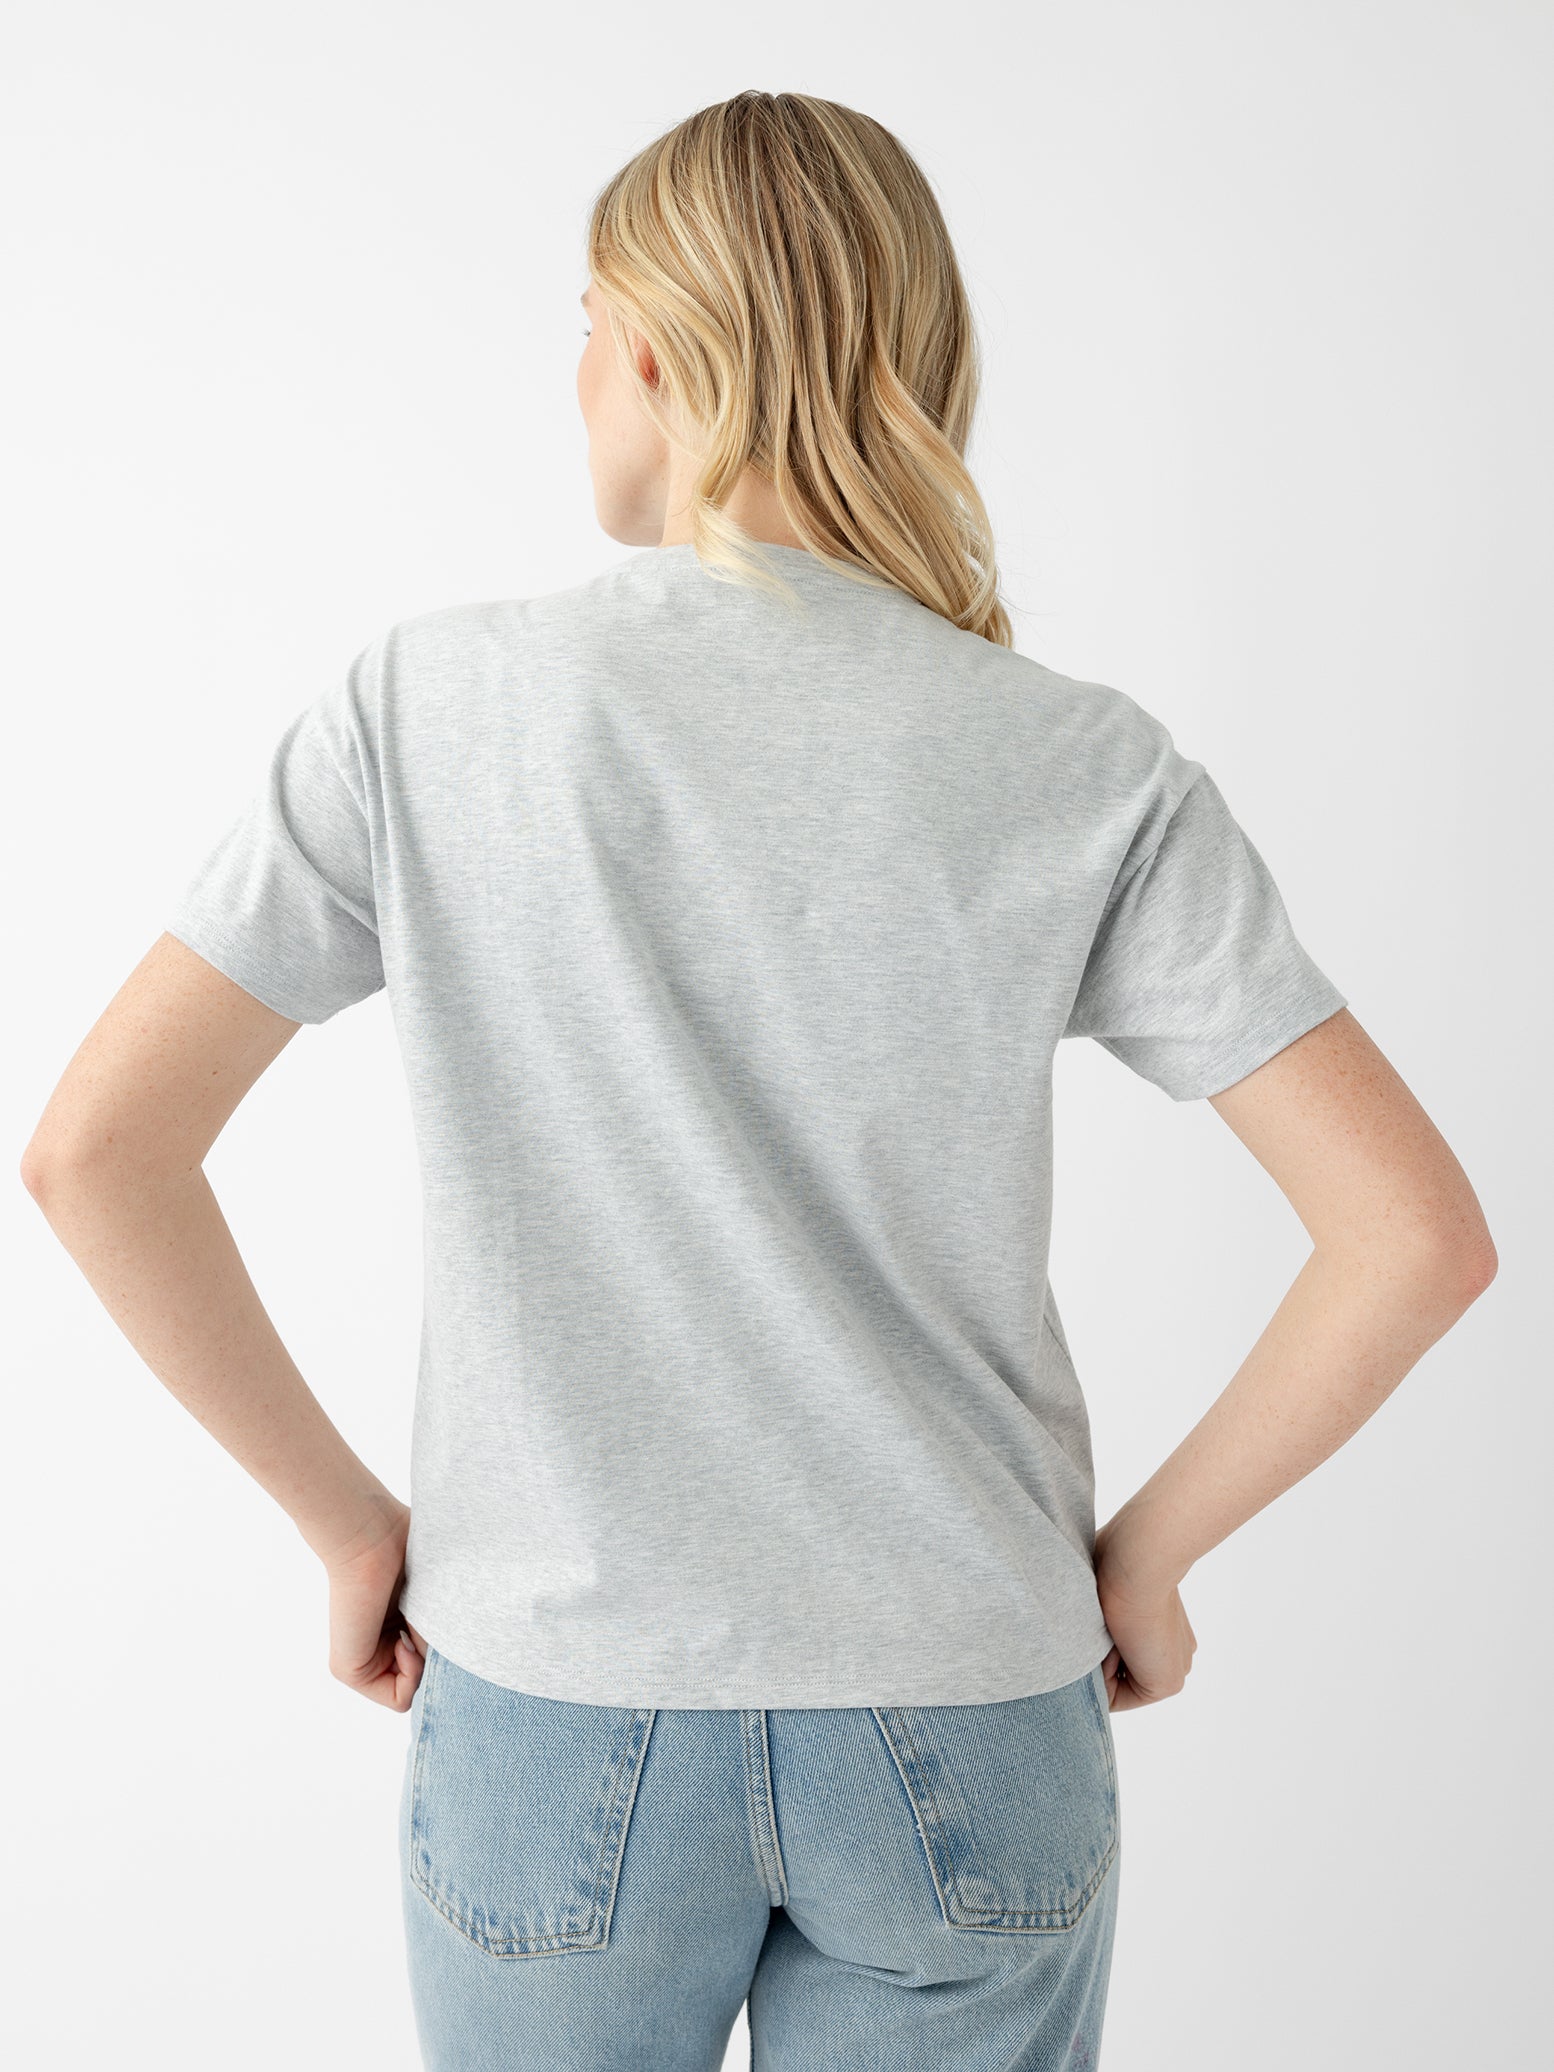 Back of woman wearing french dove heather tee 